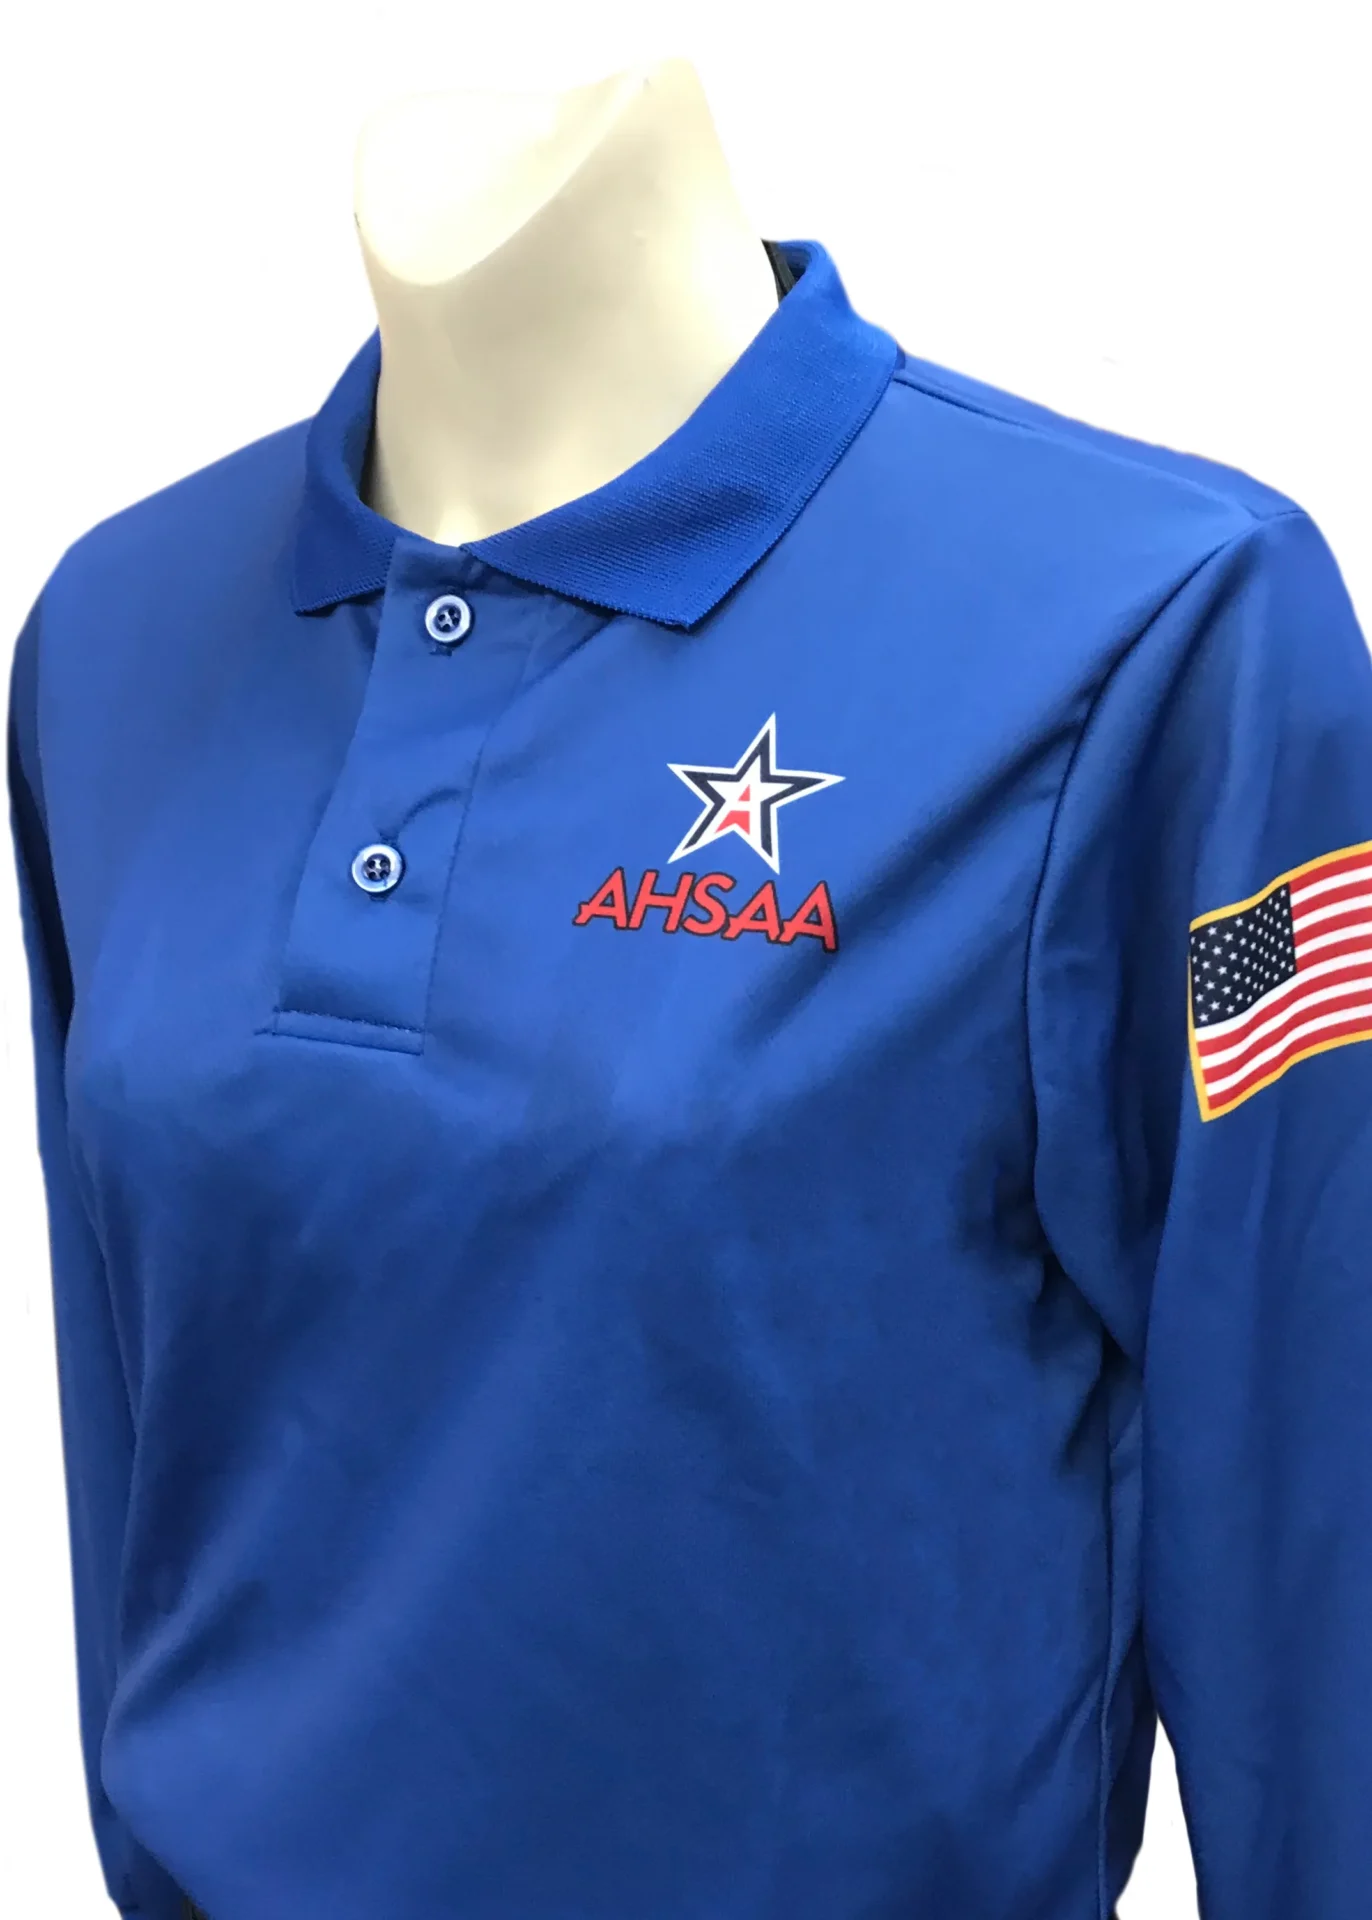 A blue shirt with an american flag on it.